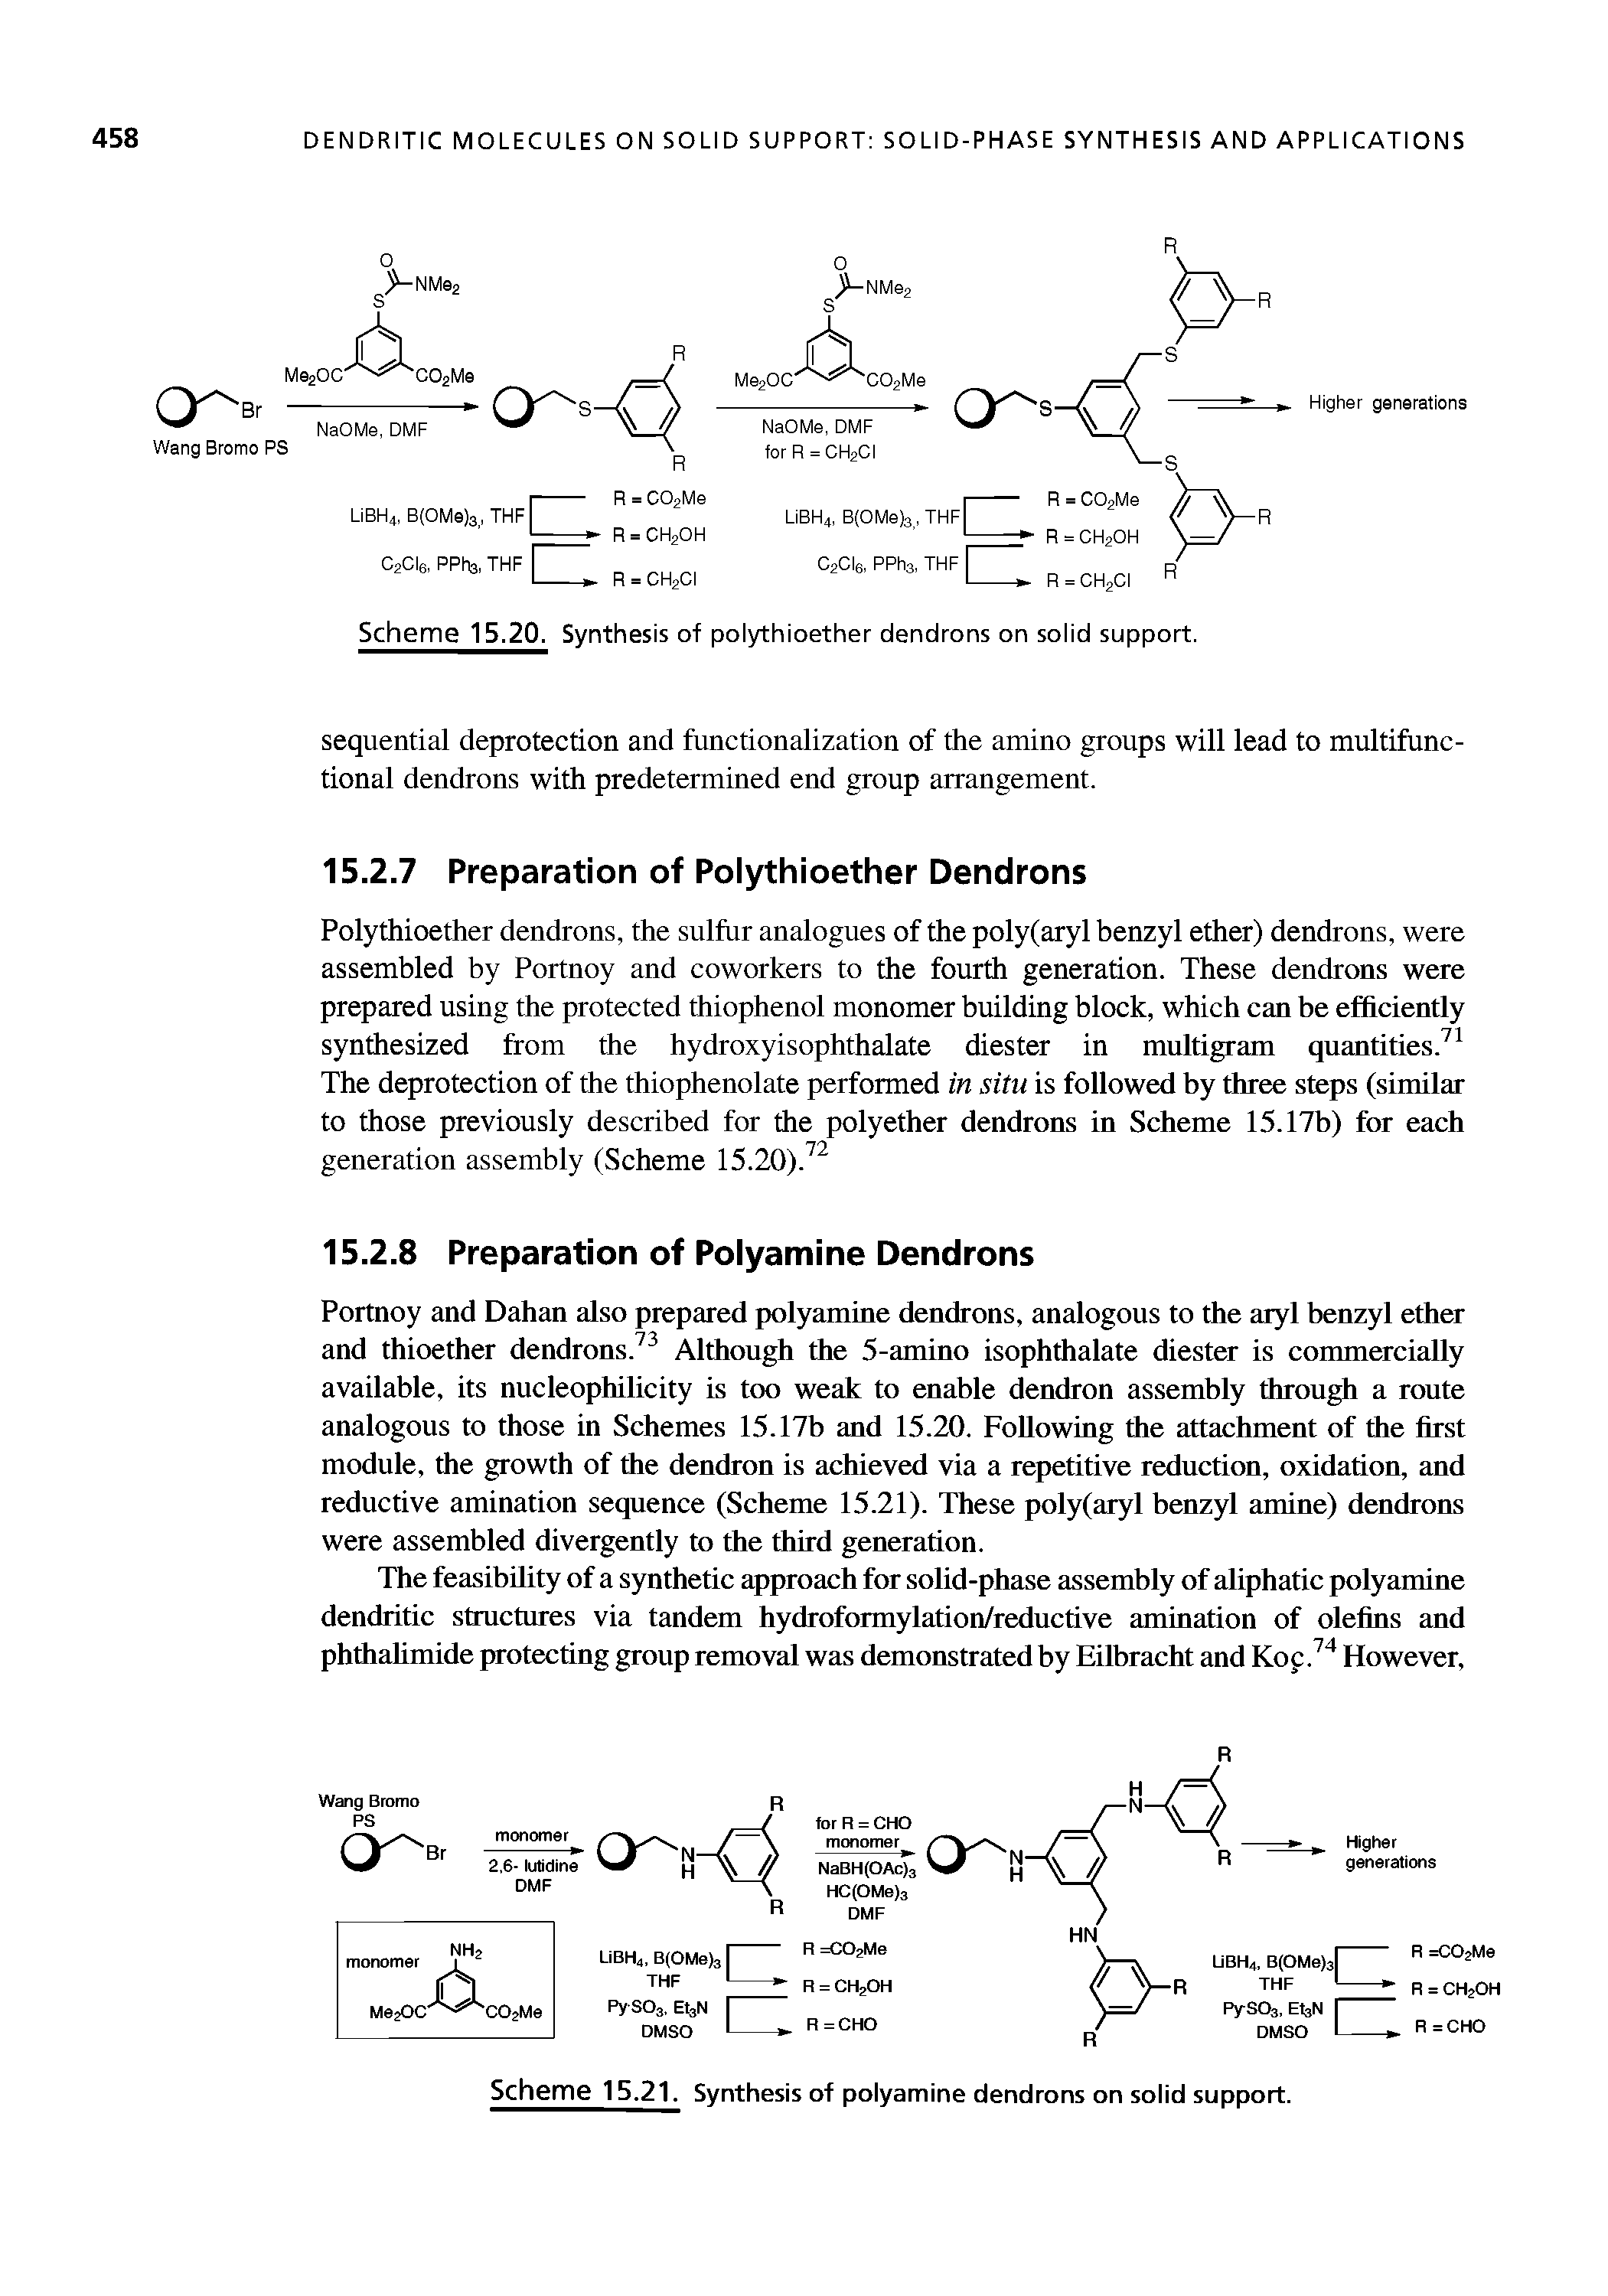 Scheme 15.21. Synthesis of polyamine dendrons on solid support.